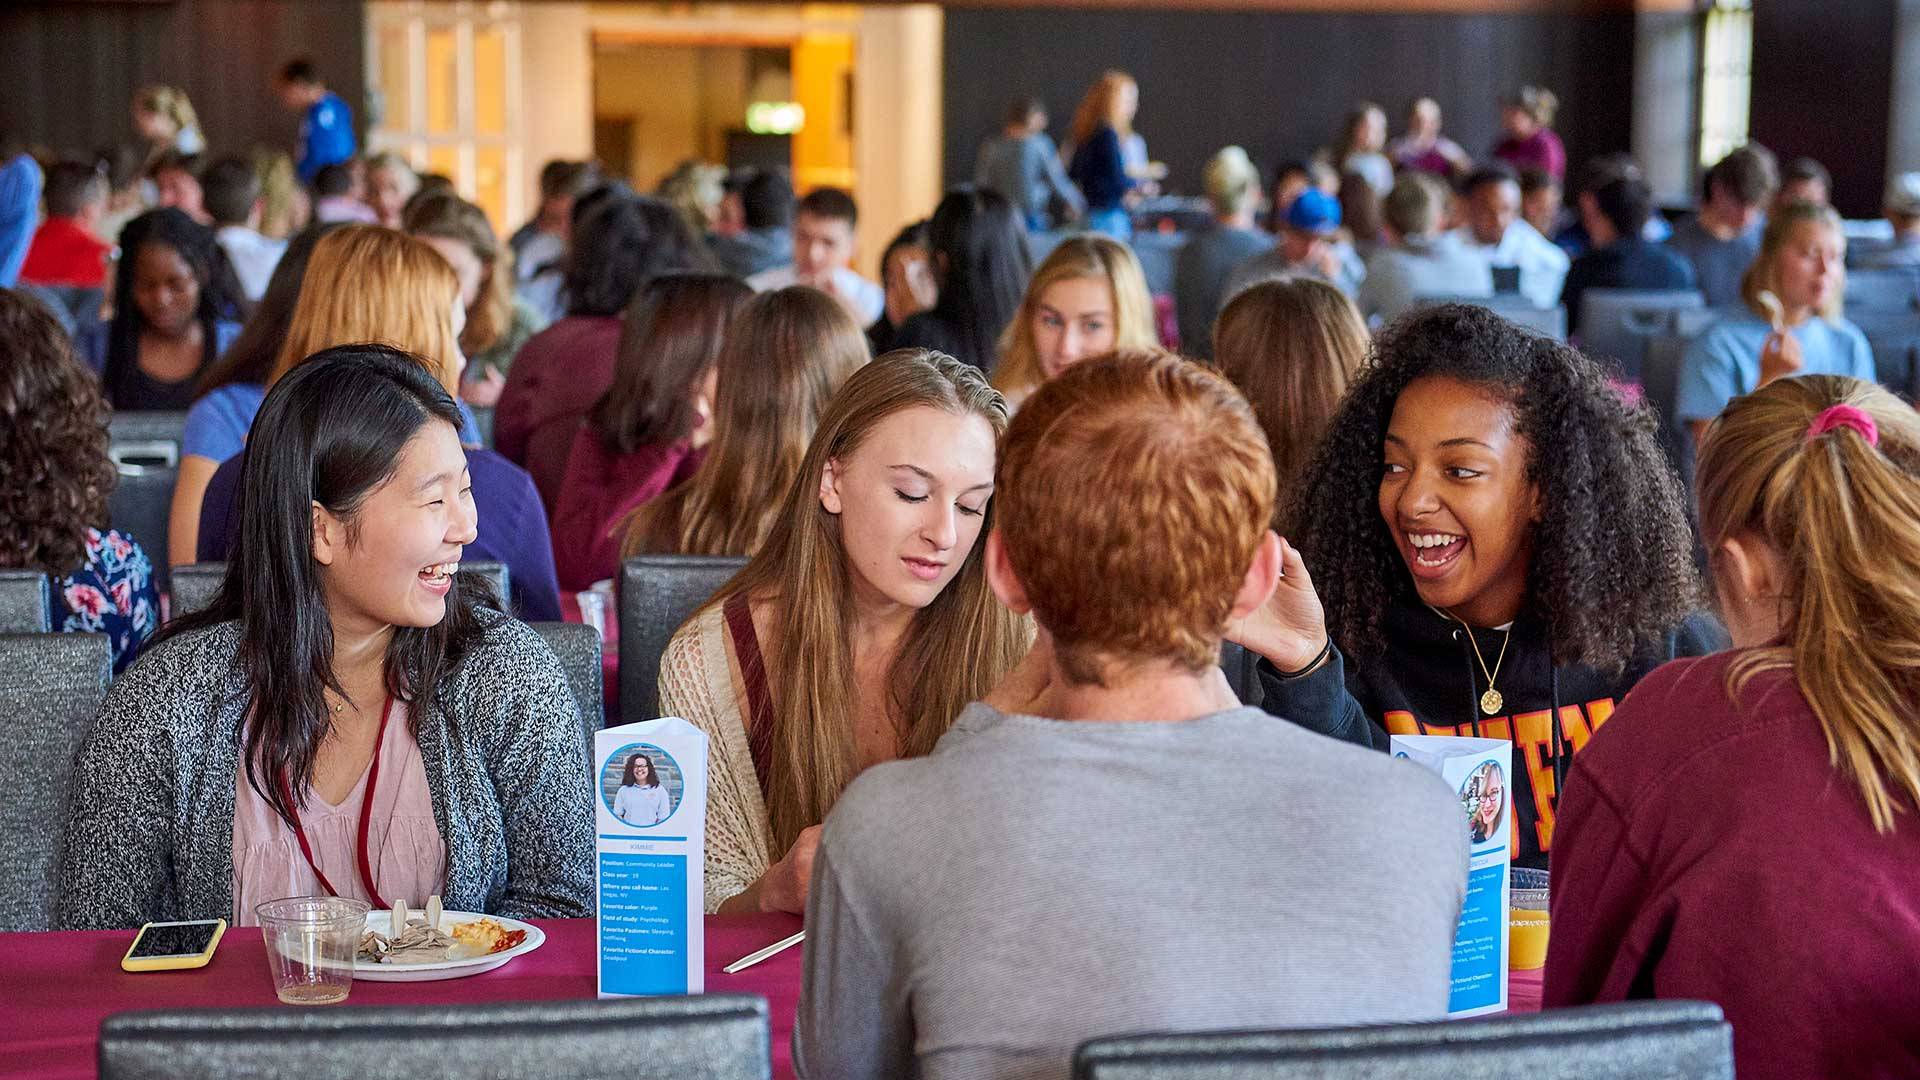 Students each brunch together in the Hall of Presidents during Orientation